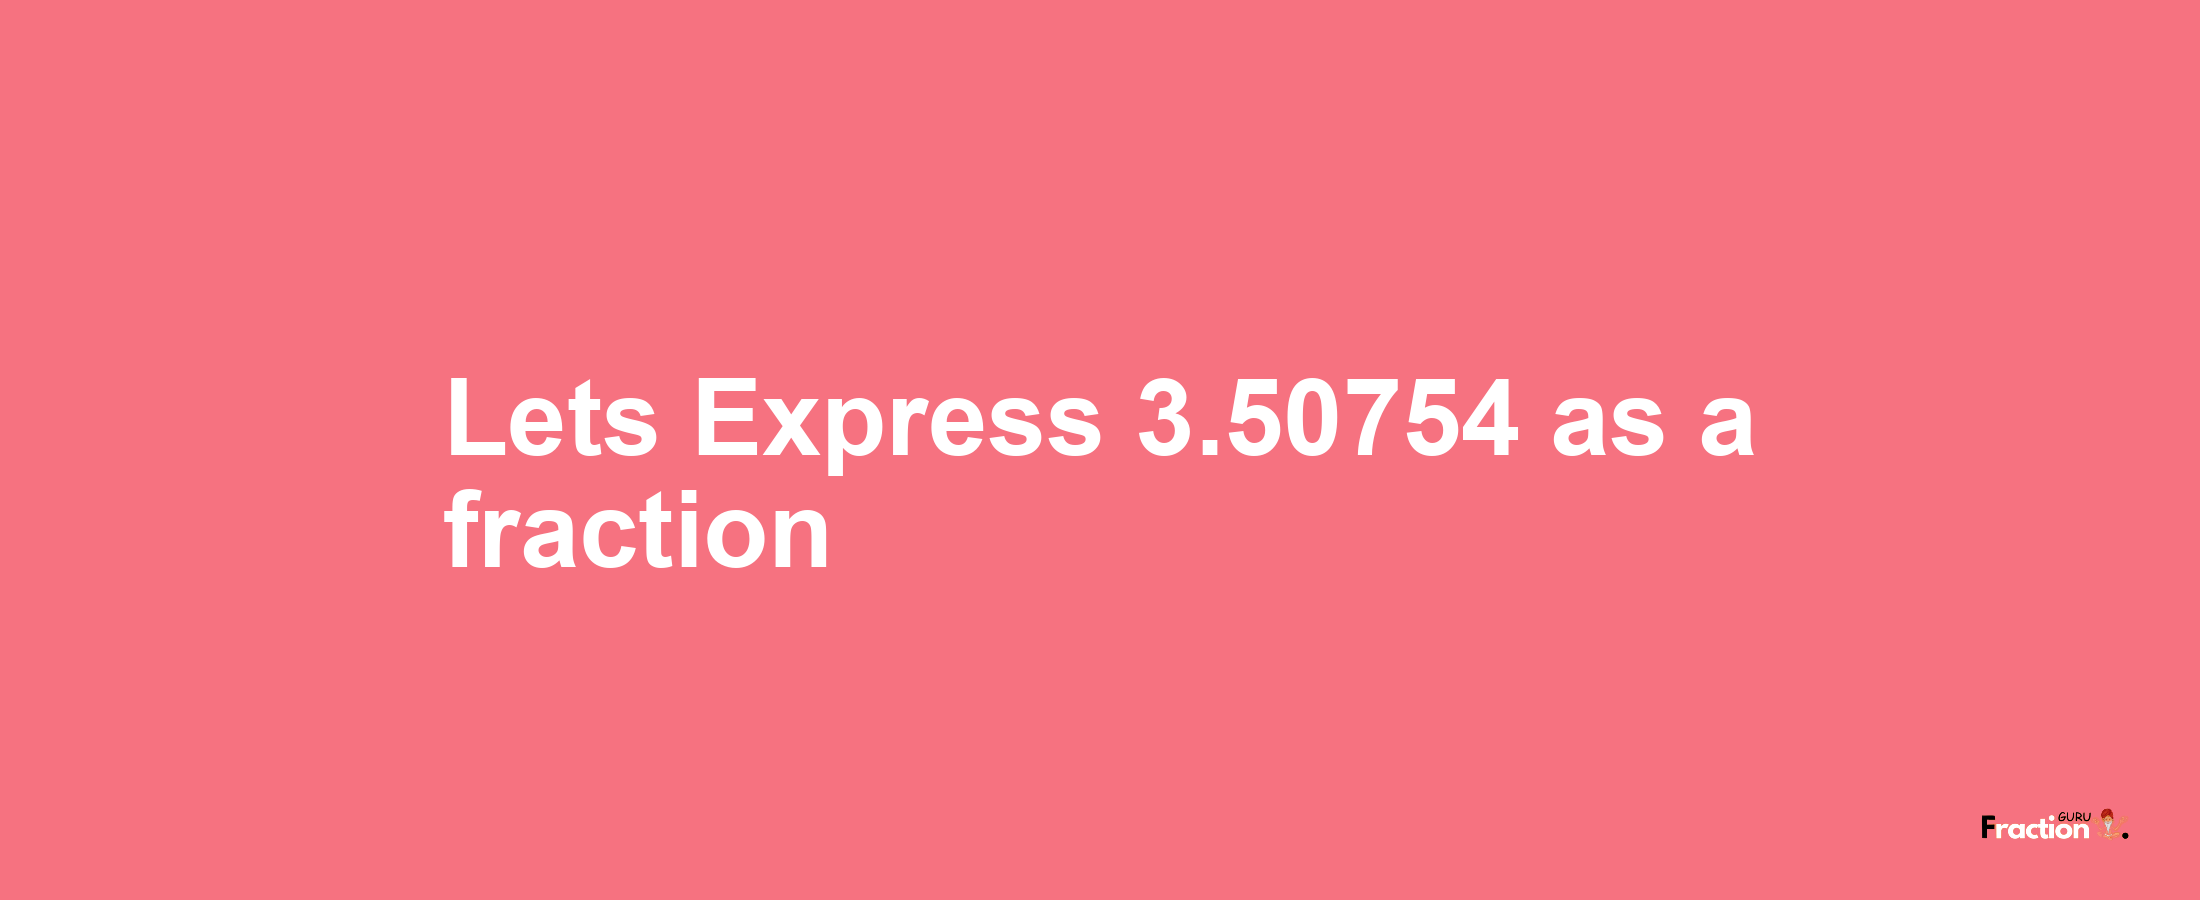 Lets Express 3.50754 as afraction